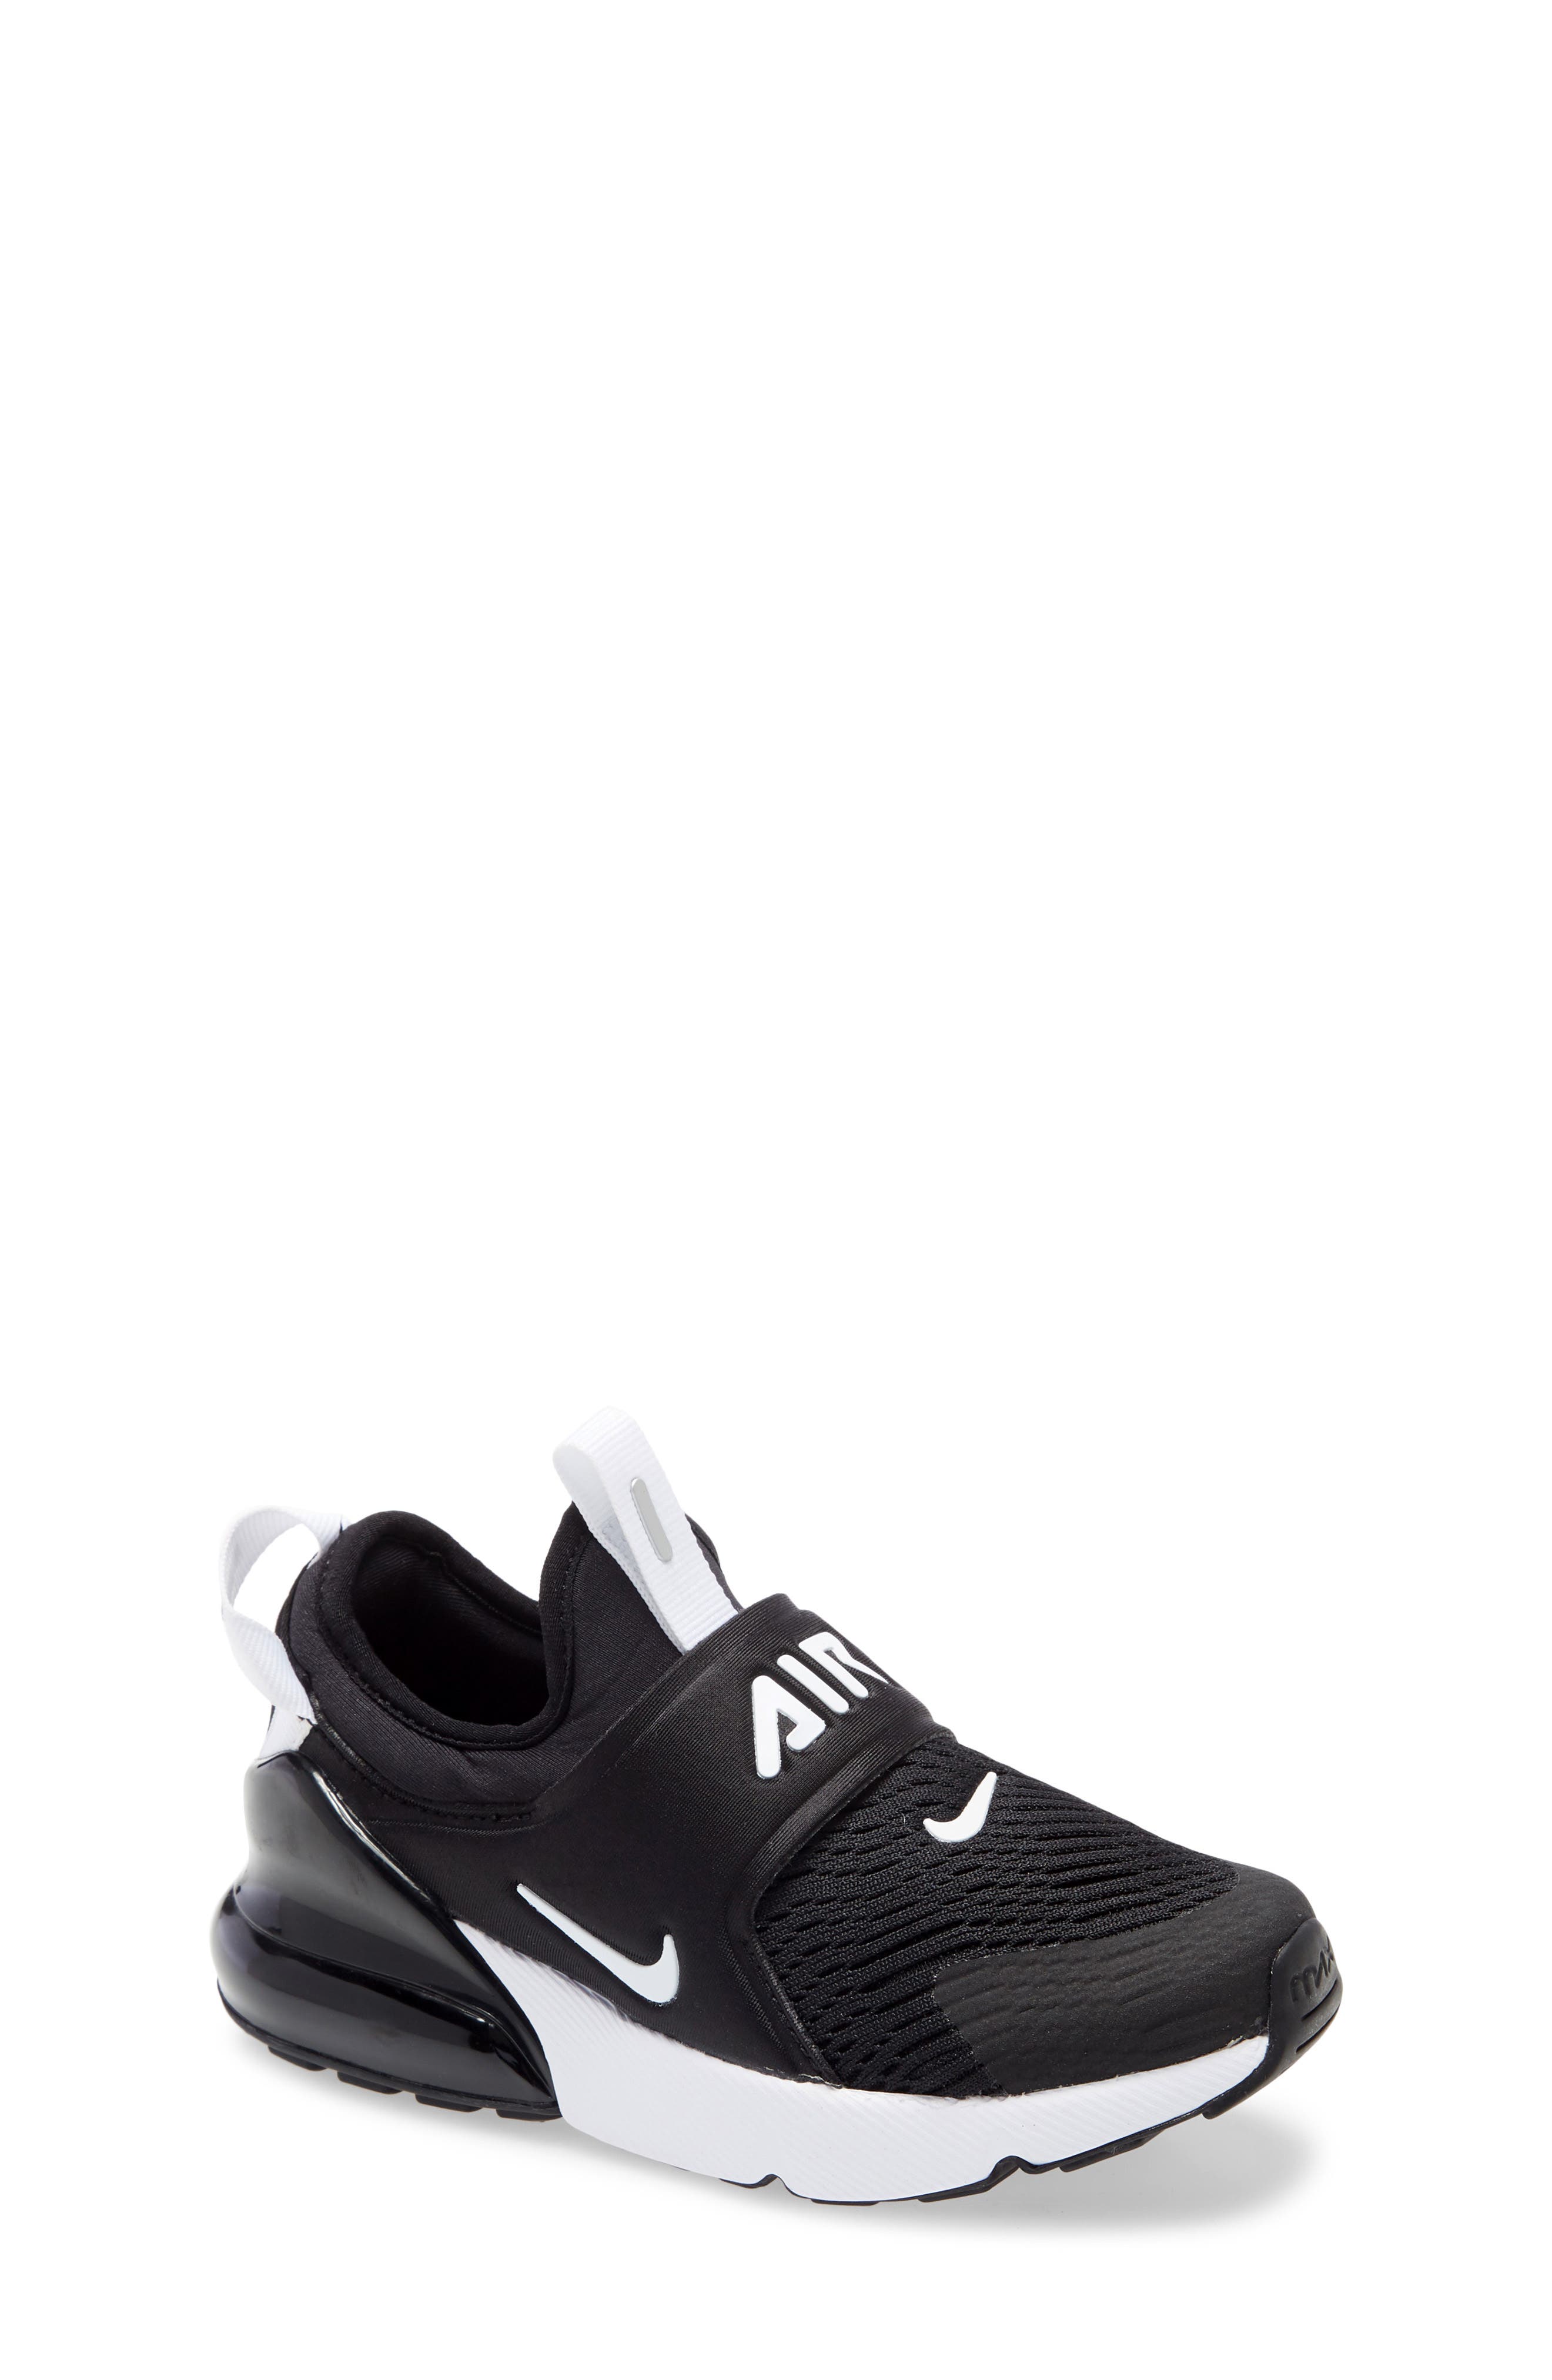 air max for girls black